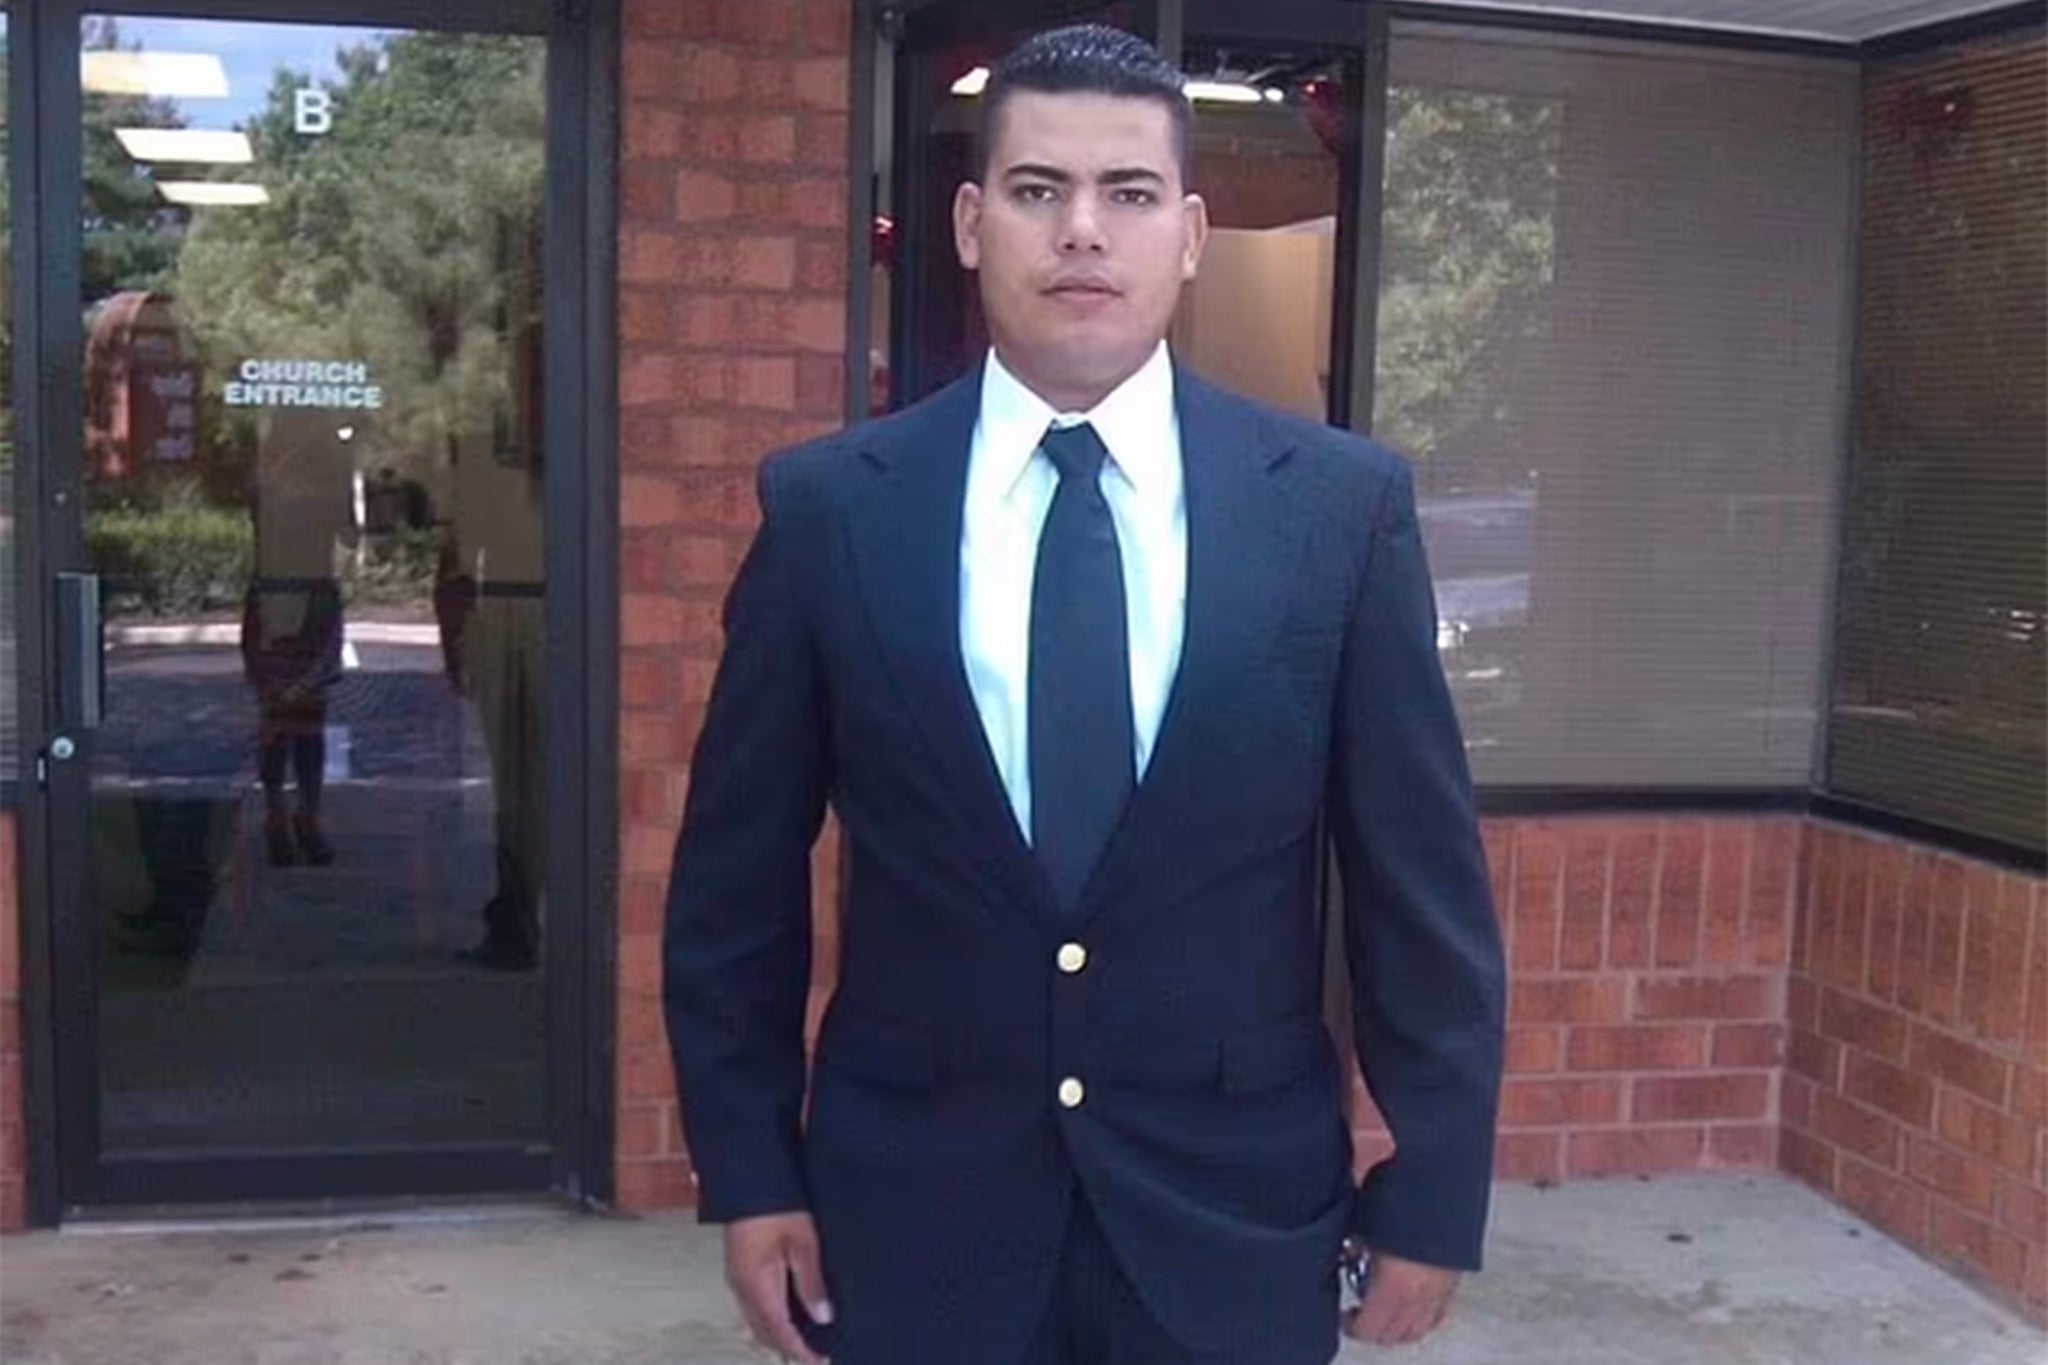 Maynor Suazo Sandoval was one of the workers killed in the collapse